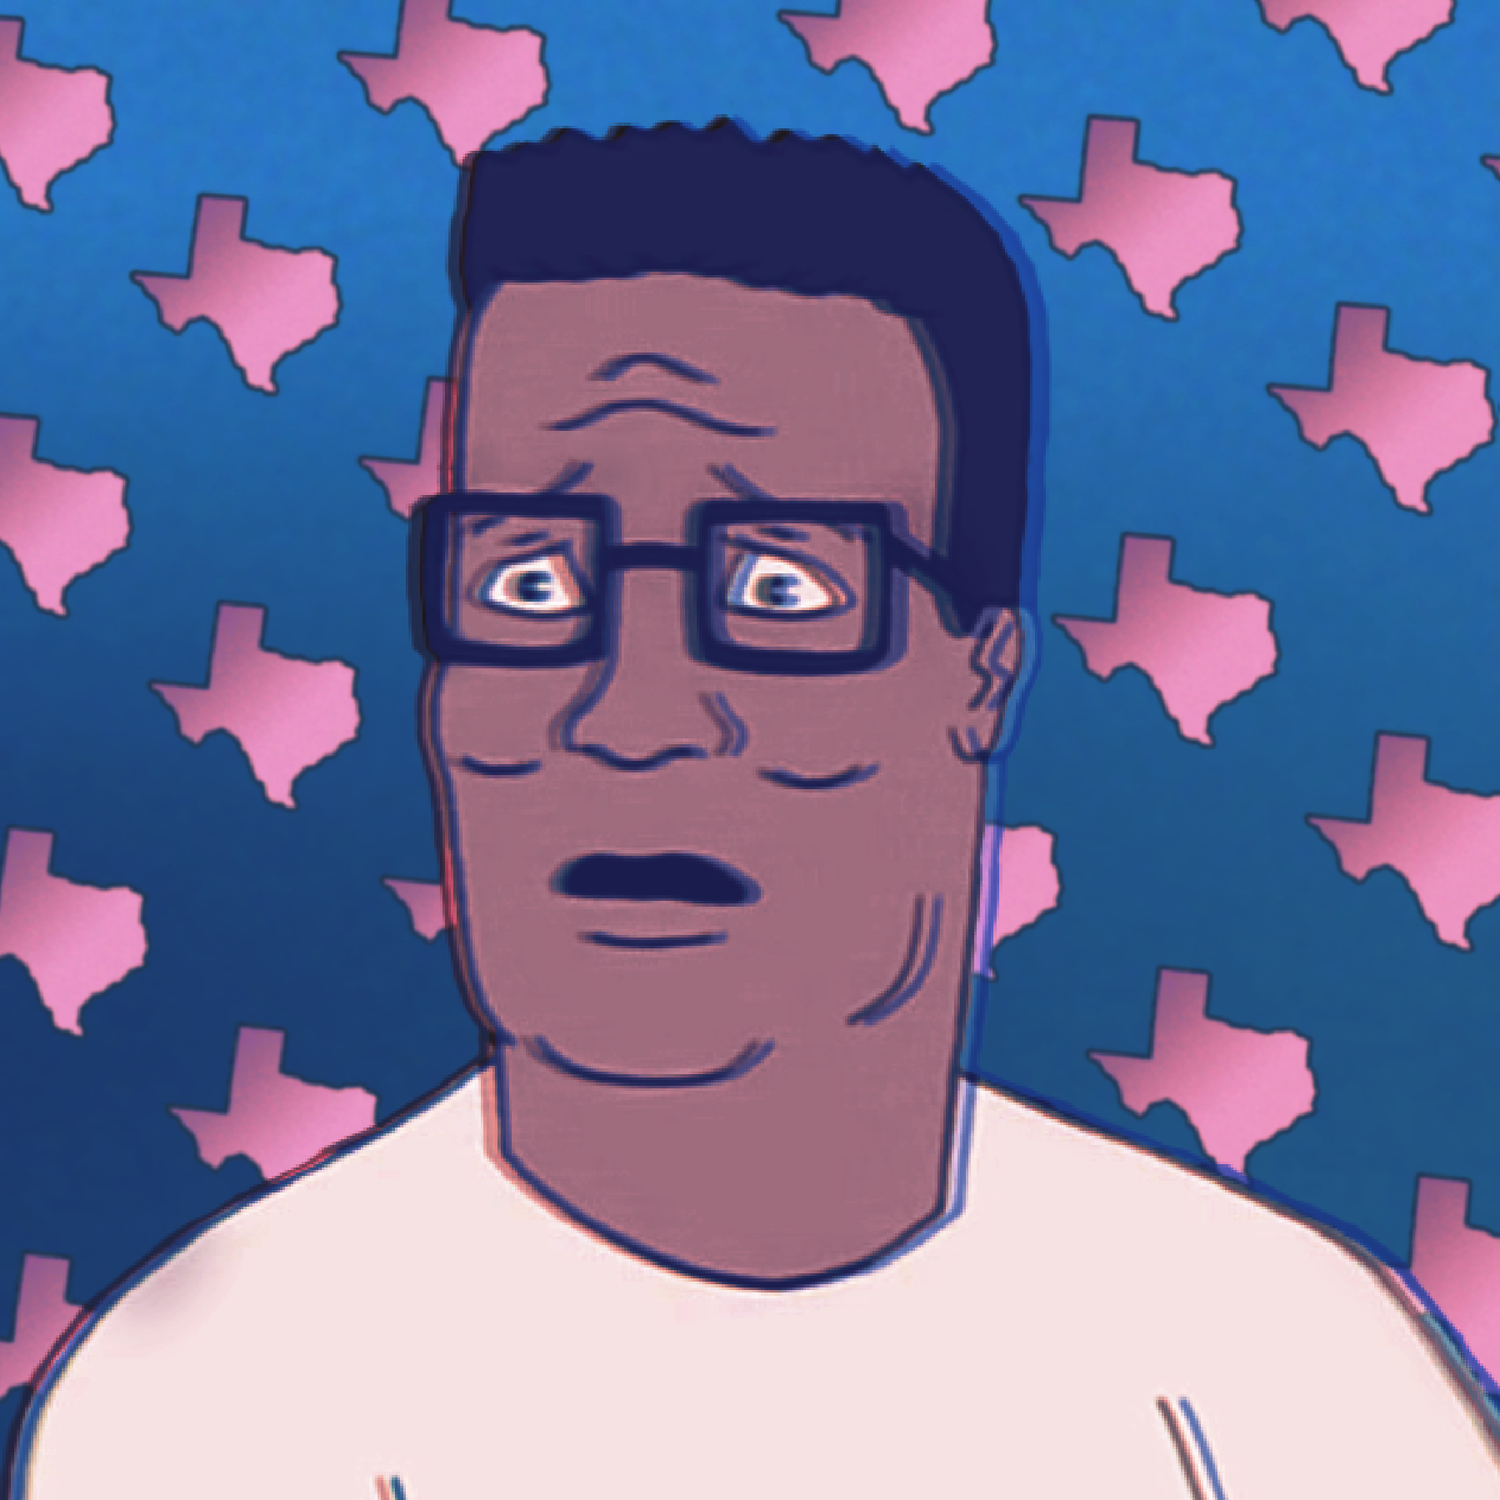 Hank Hill from King of the Hill